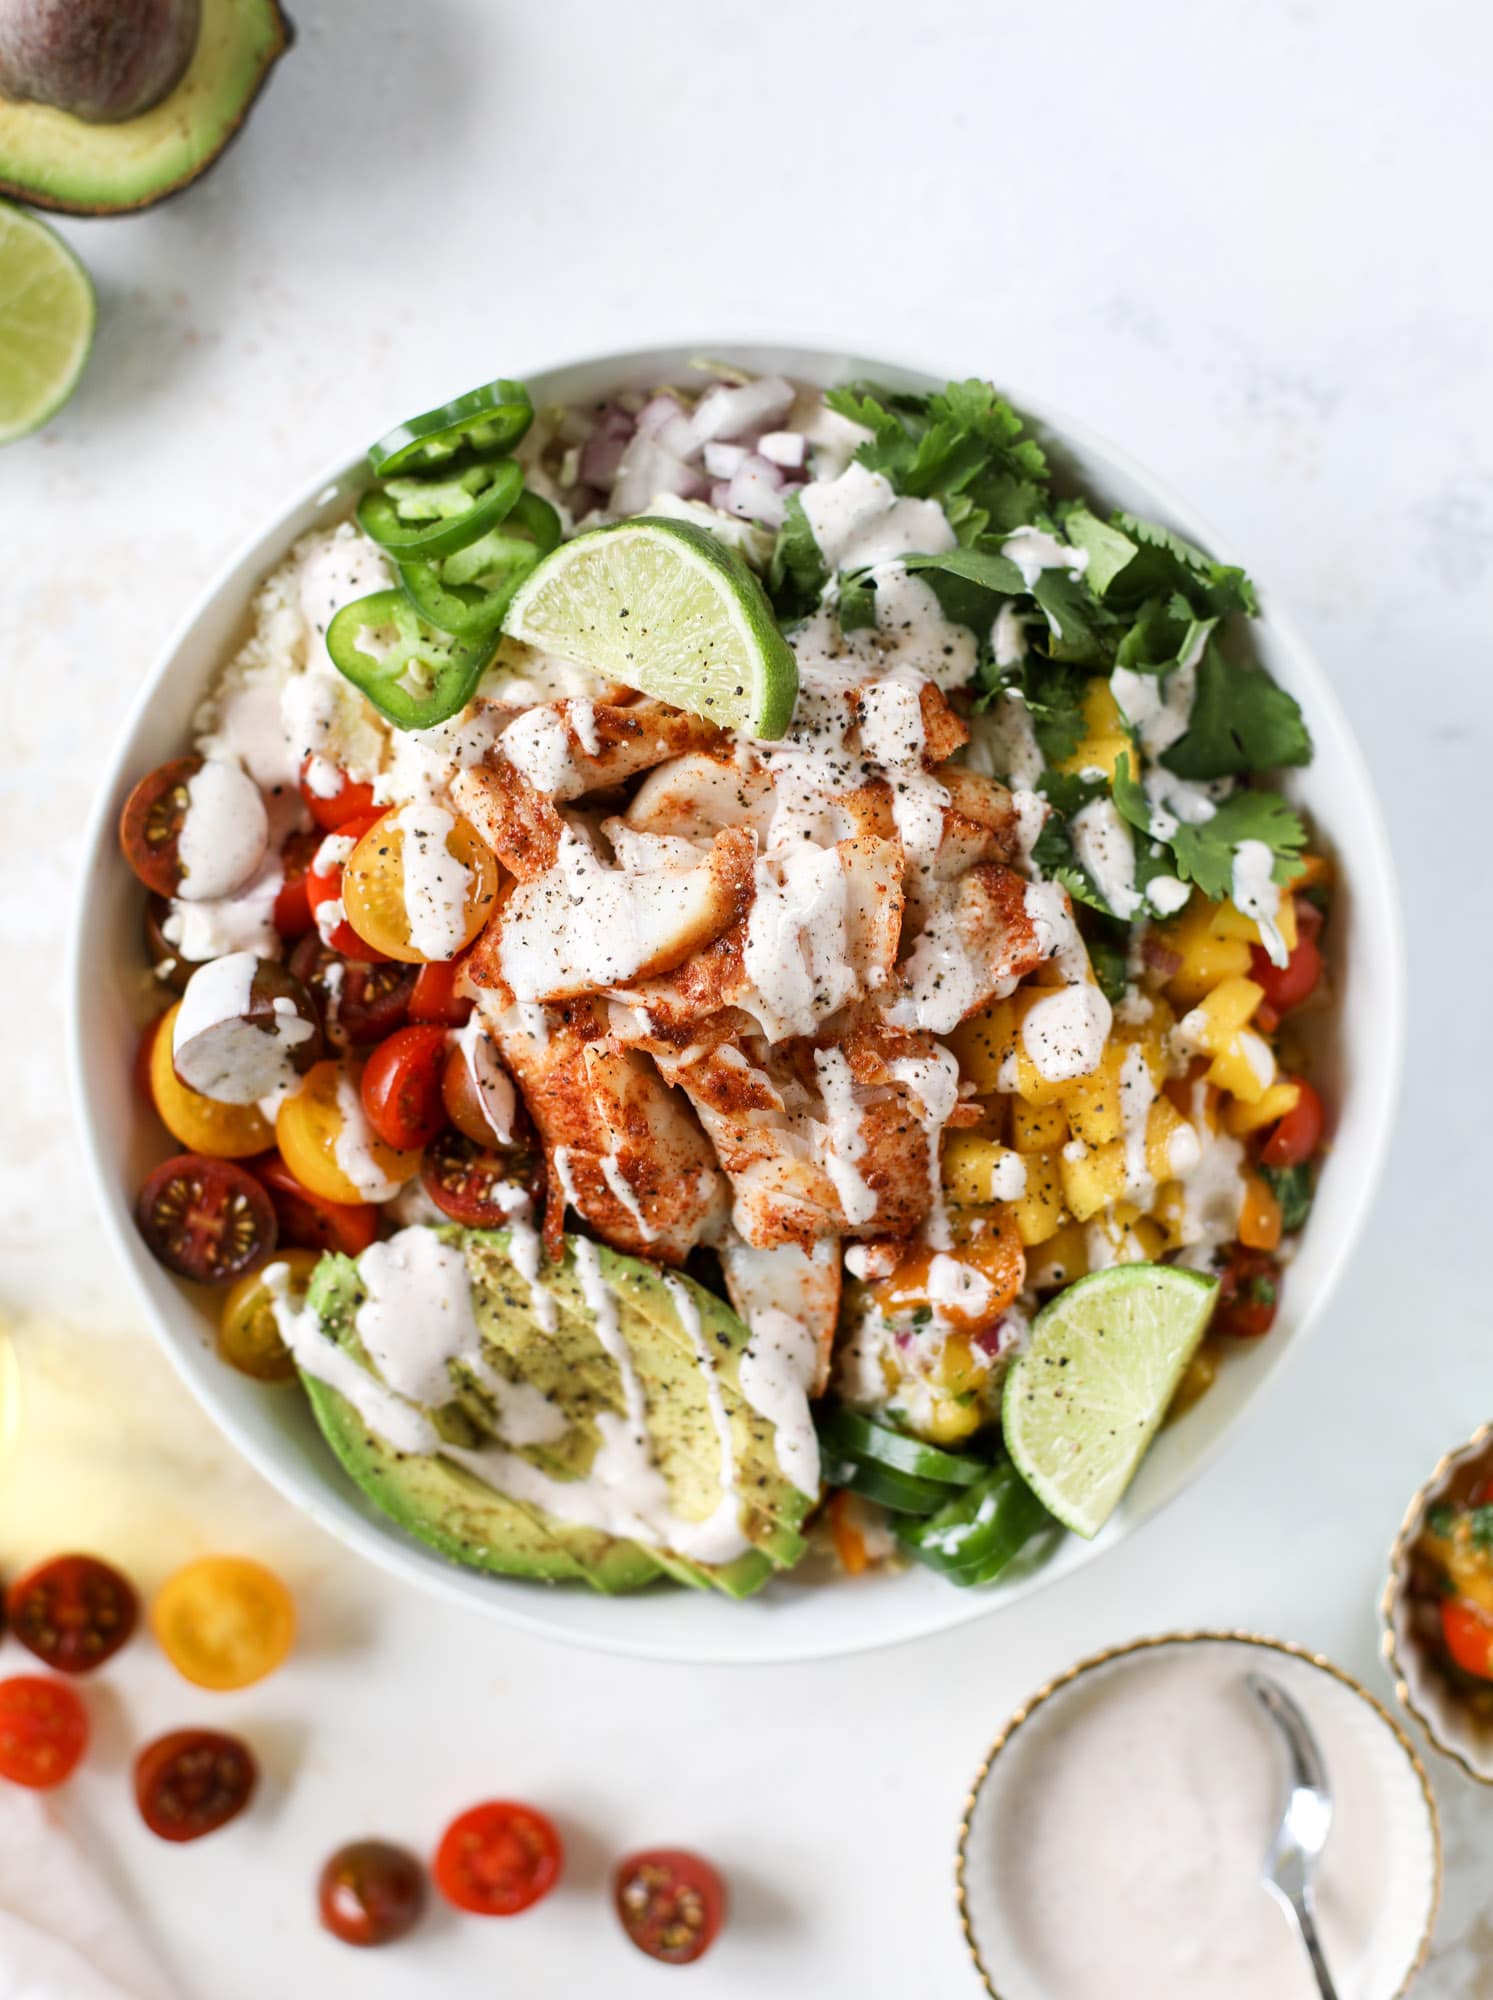 These fish taco bowls are an amazing weeknight meal idea! Napa cabbage for the base, a homemade chipotle crema, avocado, mango pico de gallo, spicy broiled white fish and lots of lime. Major flavor explosion and so easy too! I howsweeteats.com #fish #taco #bowls #spicy #healthy #dinner